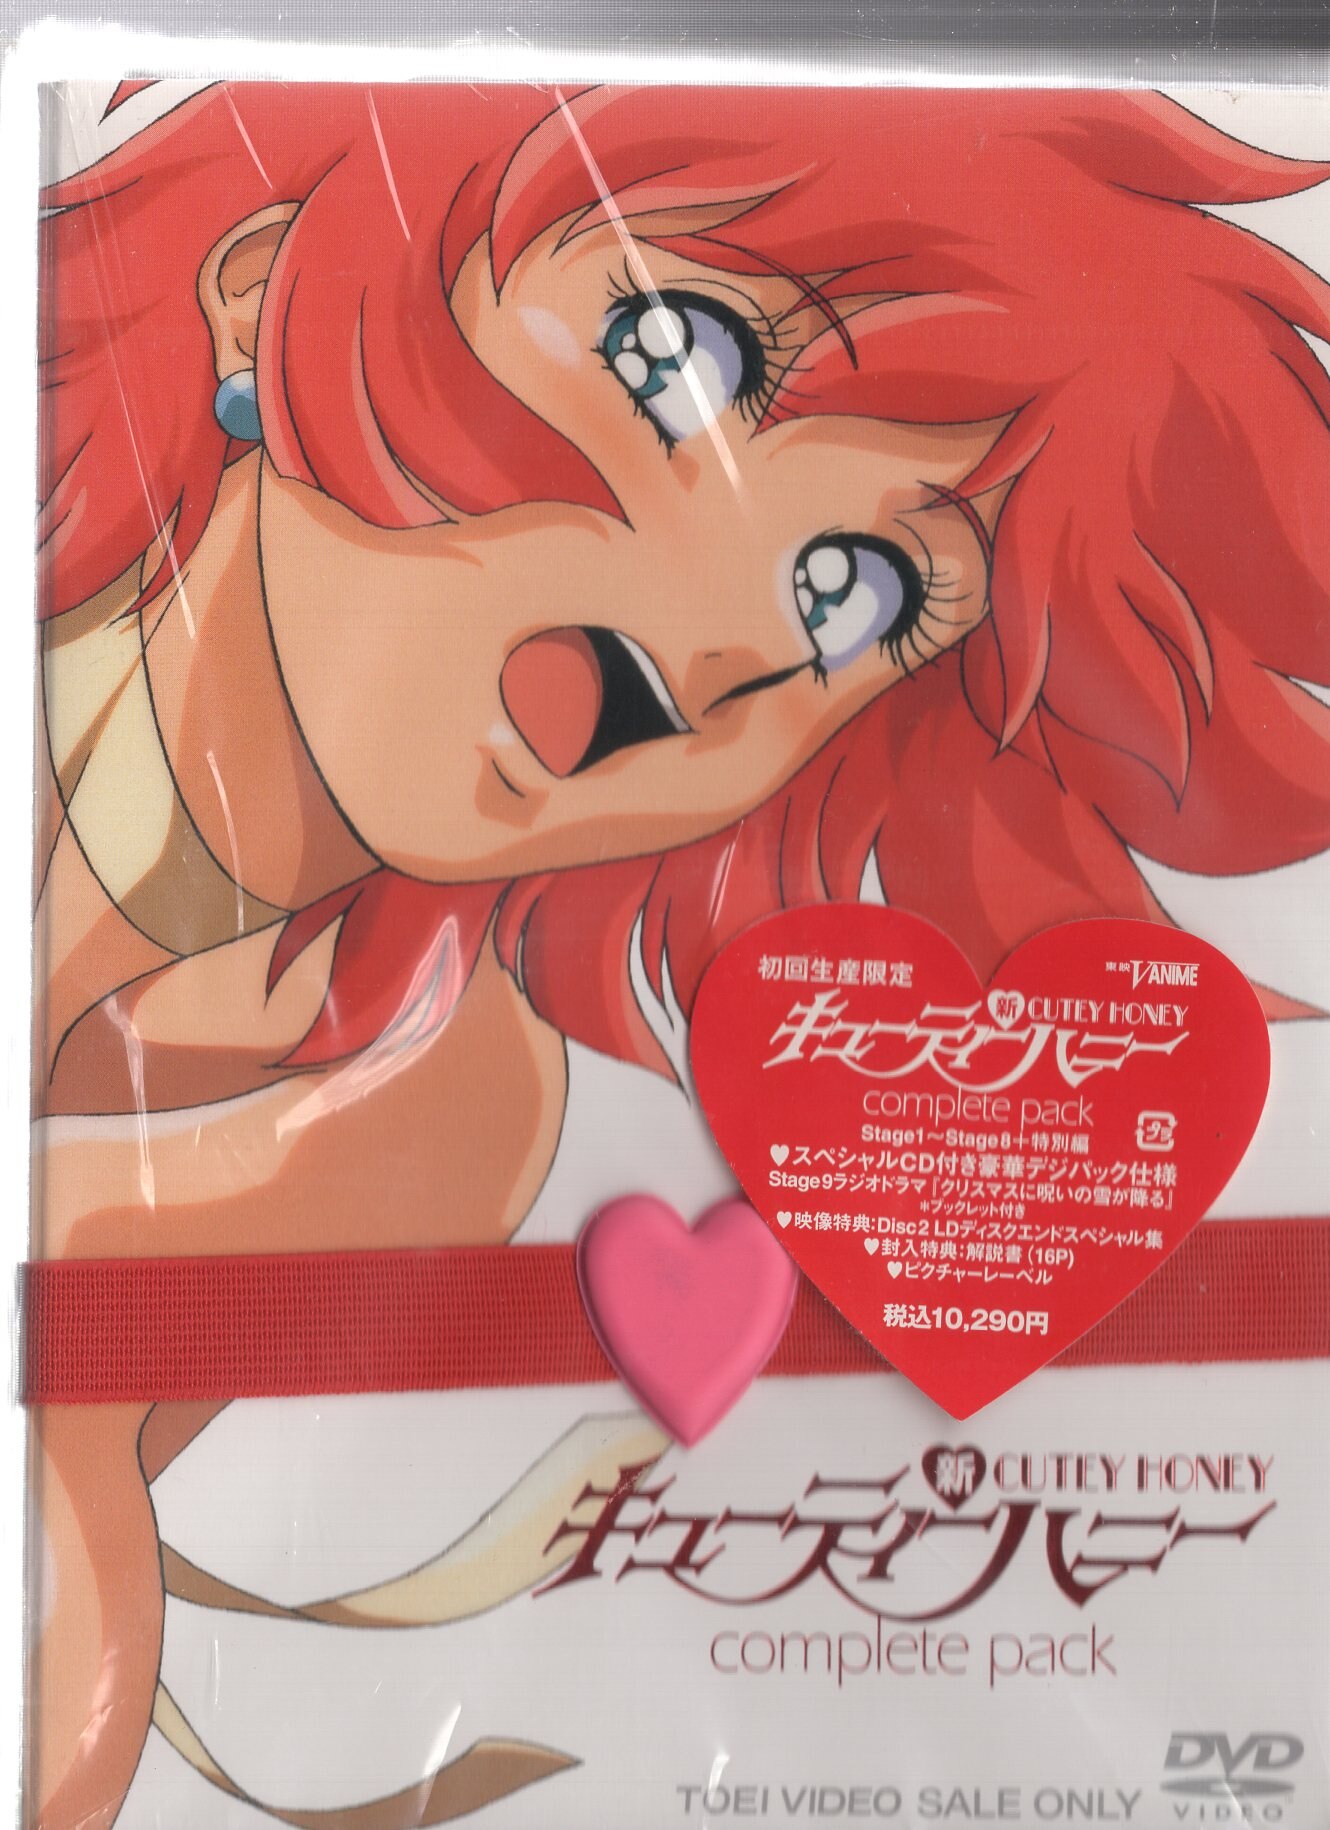 Anime DVD First Edition Disc(Shin) New Cutie Honey Complete Pack